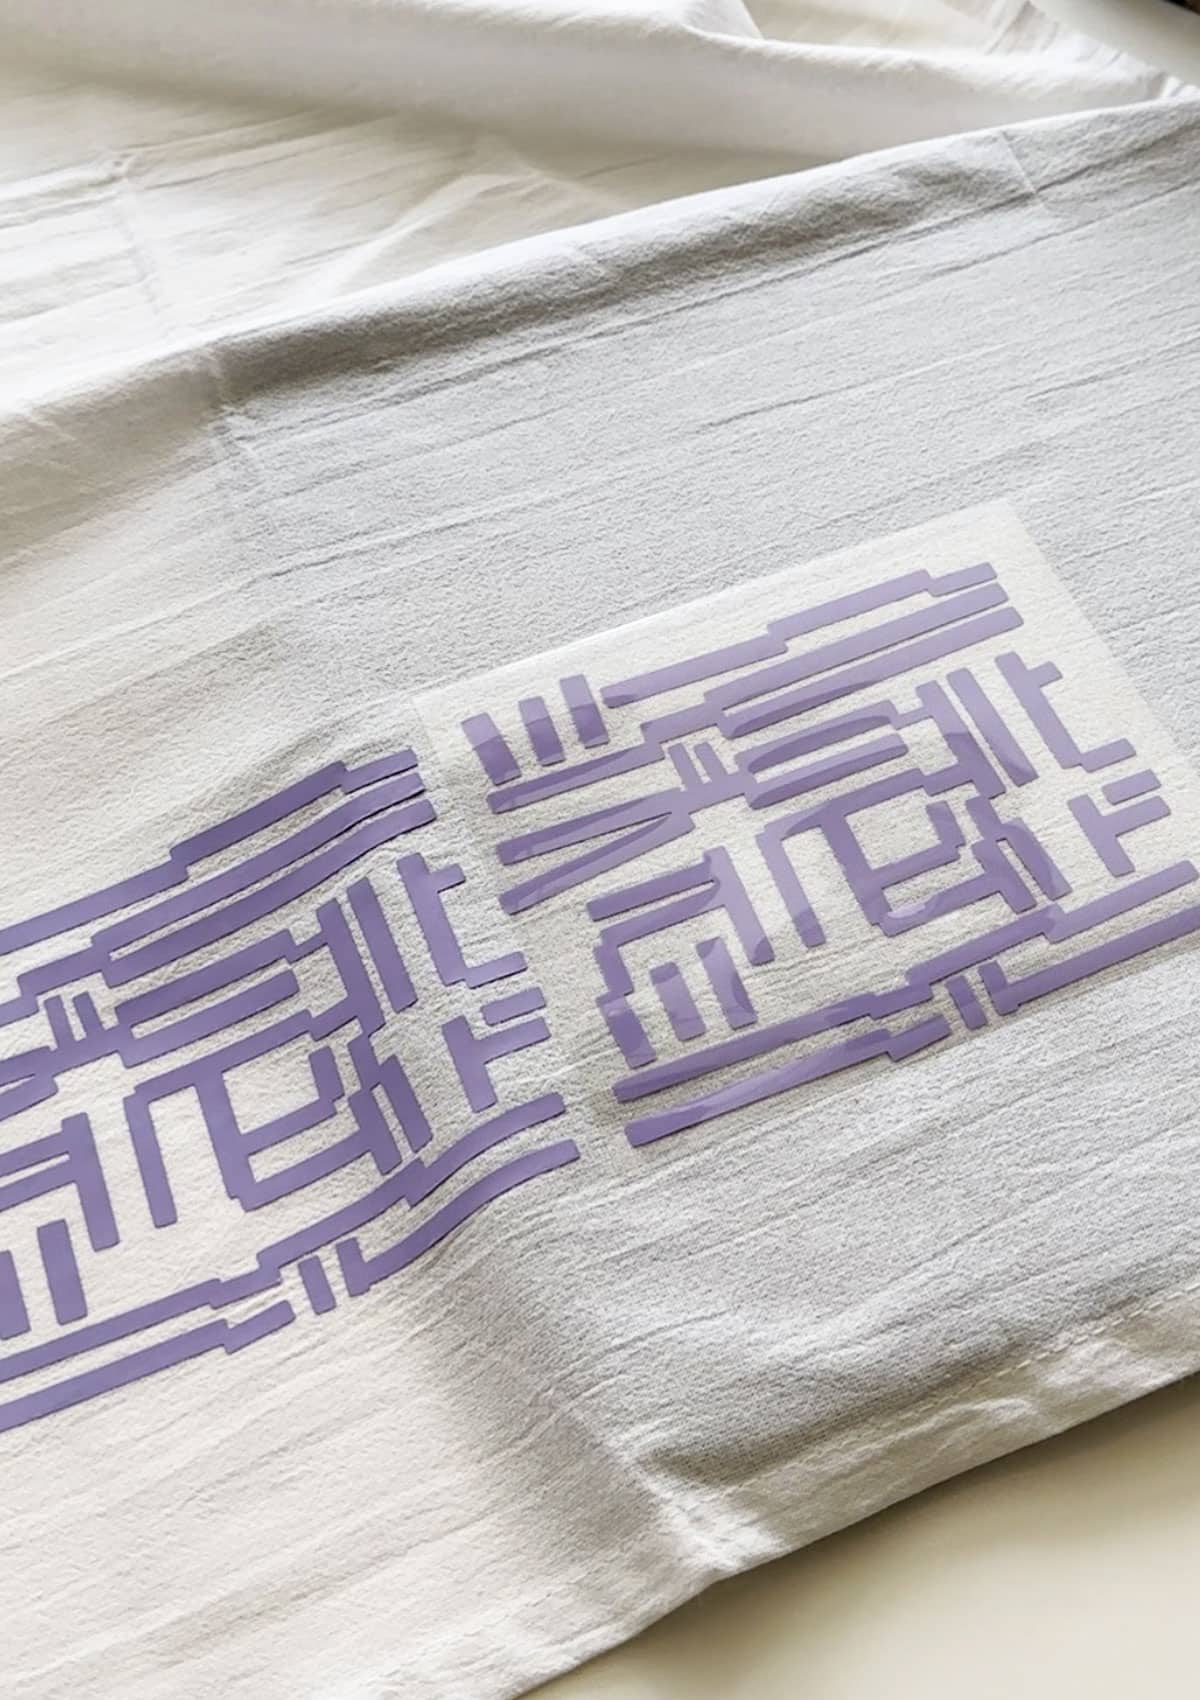 Easy Cricut Project - Make This Modern Tea Towel - Use the Cricut Easy Press to iron on the design to your tea towel